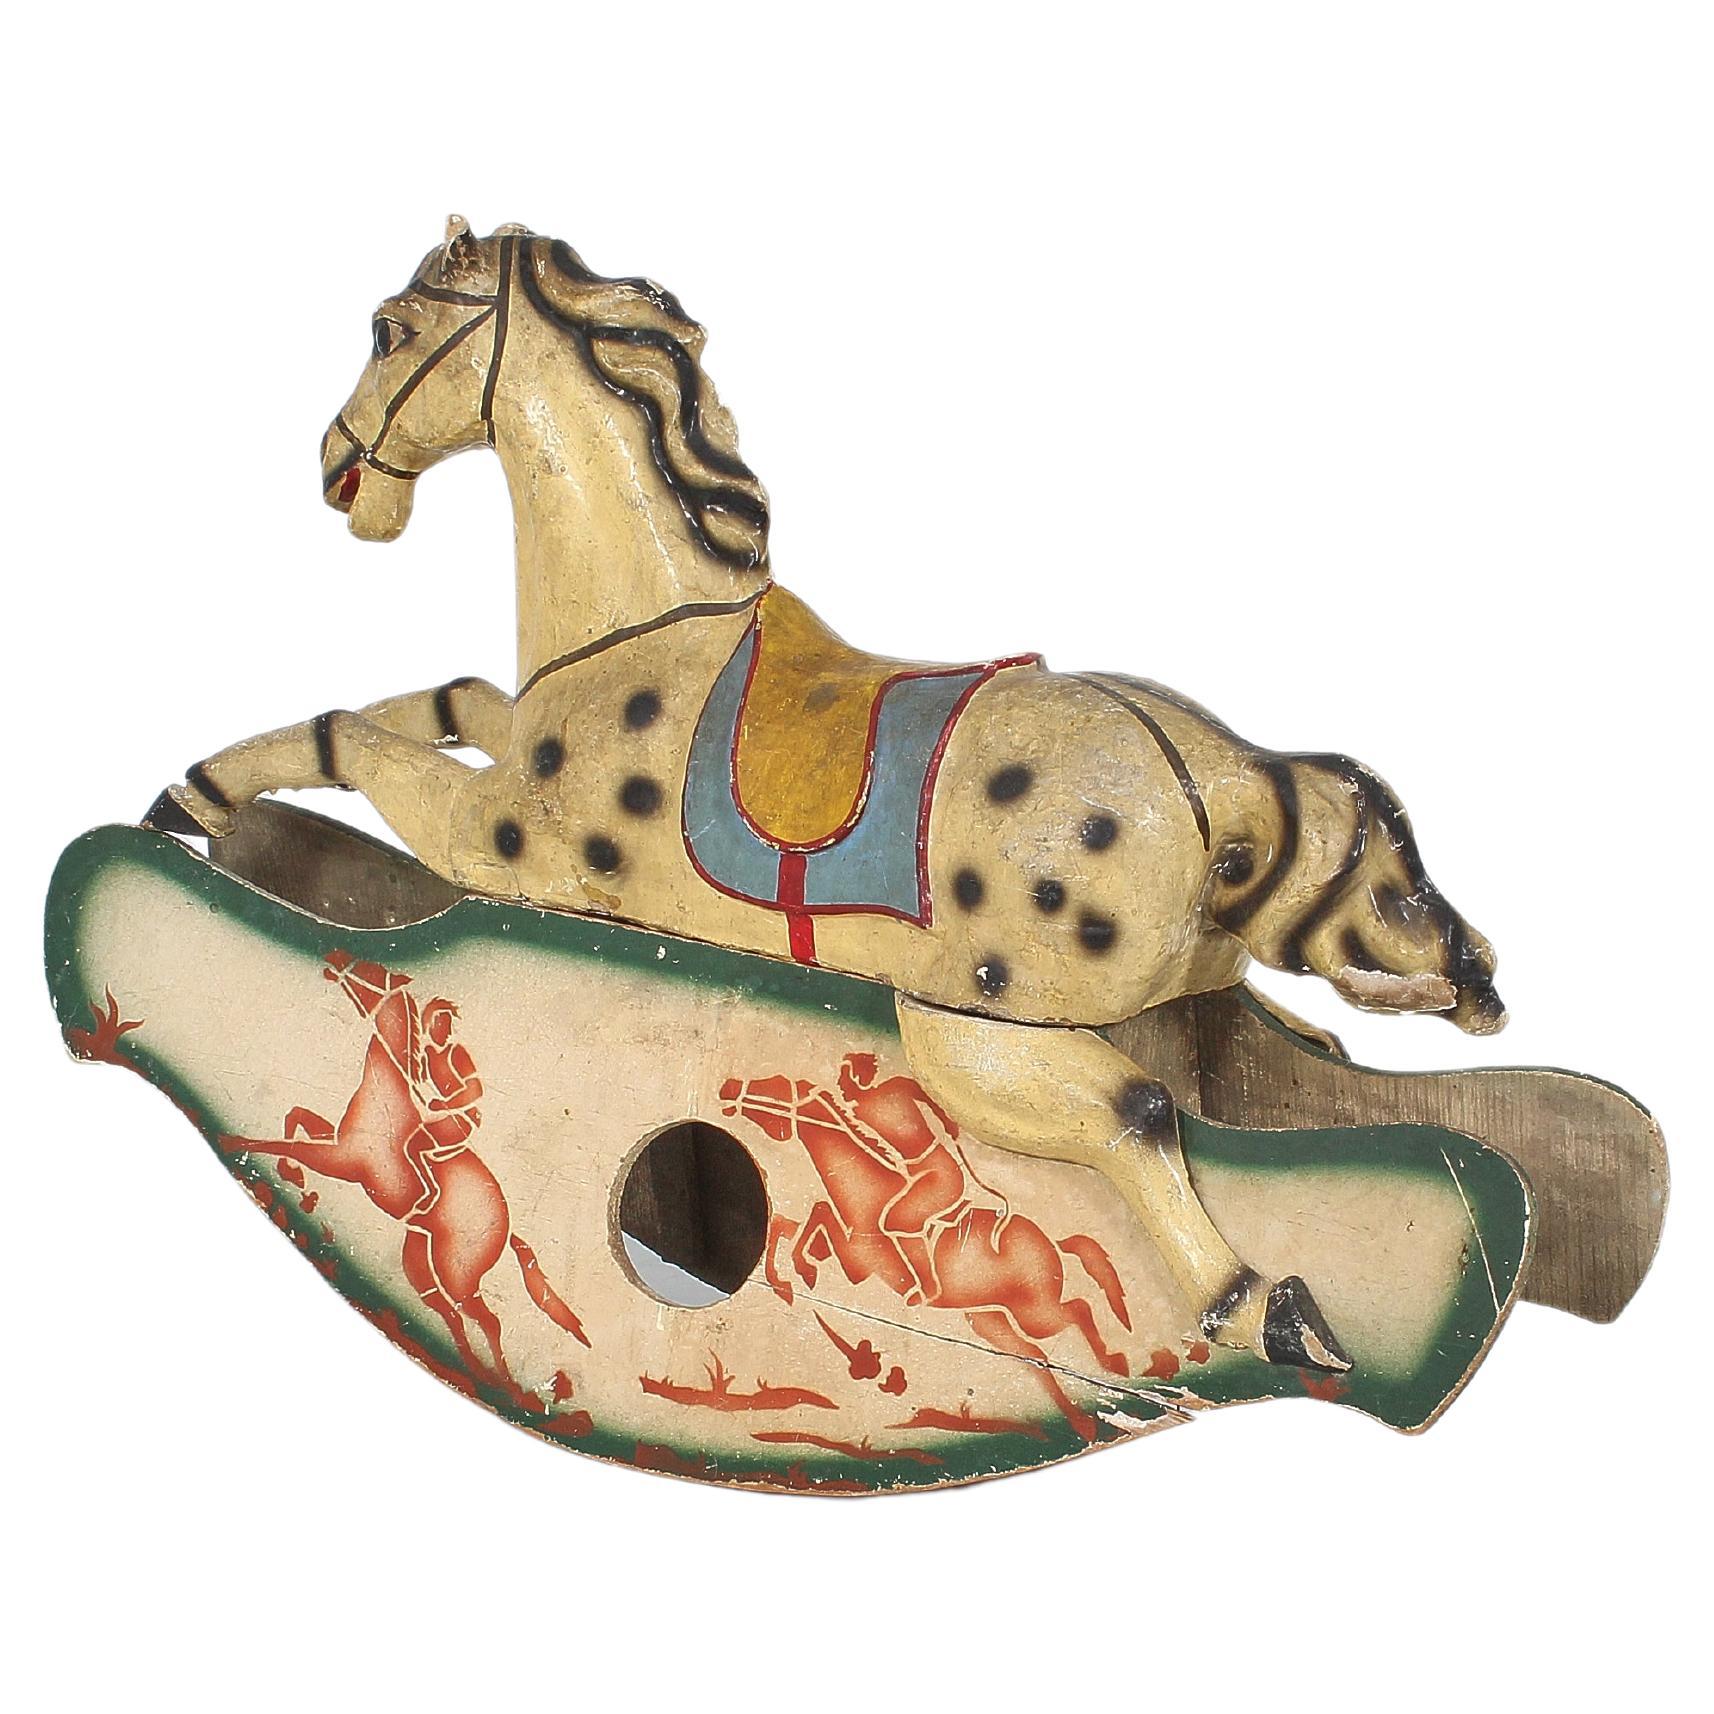 Beautiful handmade rocking horse with metal rod frame covered with a painted and hand-decorated papier-mâché shape. The base is in shaped wood, decorated by hand. Valuable Italian manufacture from the first half of the 19th century.
Wear consistent